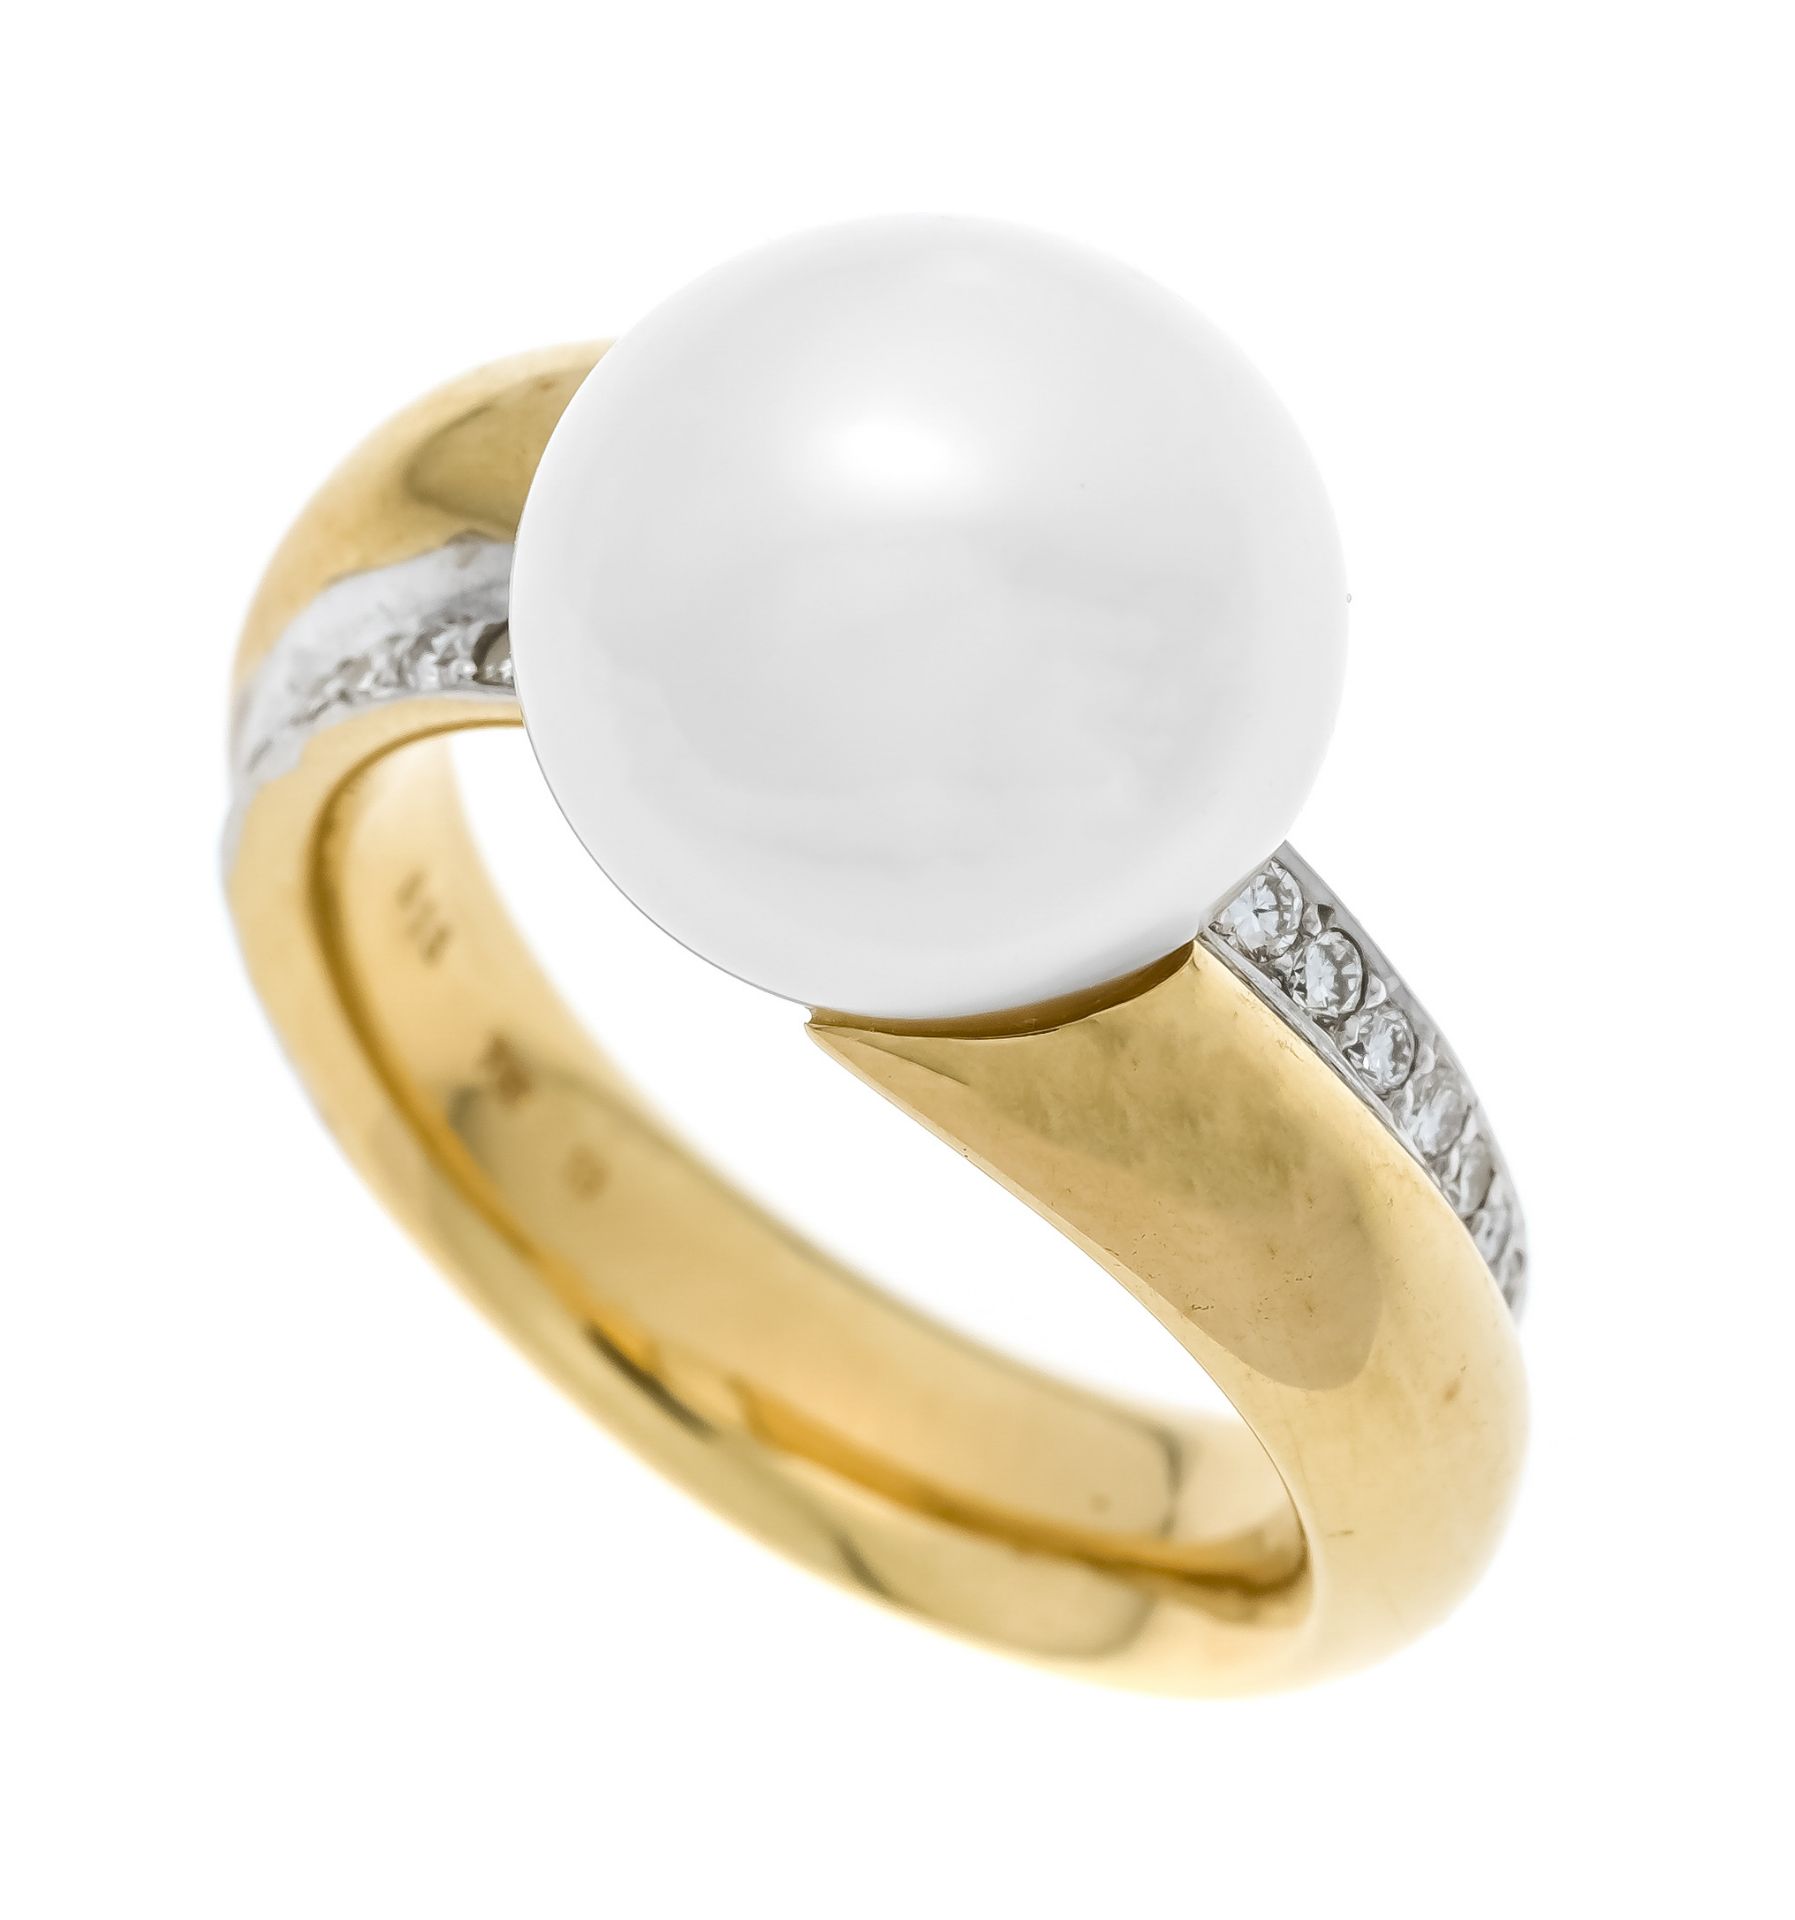 South Sea pearl diamond ring GG/WG 750/000 with a white, slightly elipse-shaped South Sea pearl 12.5